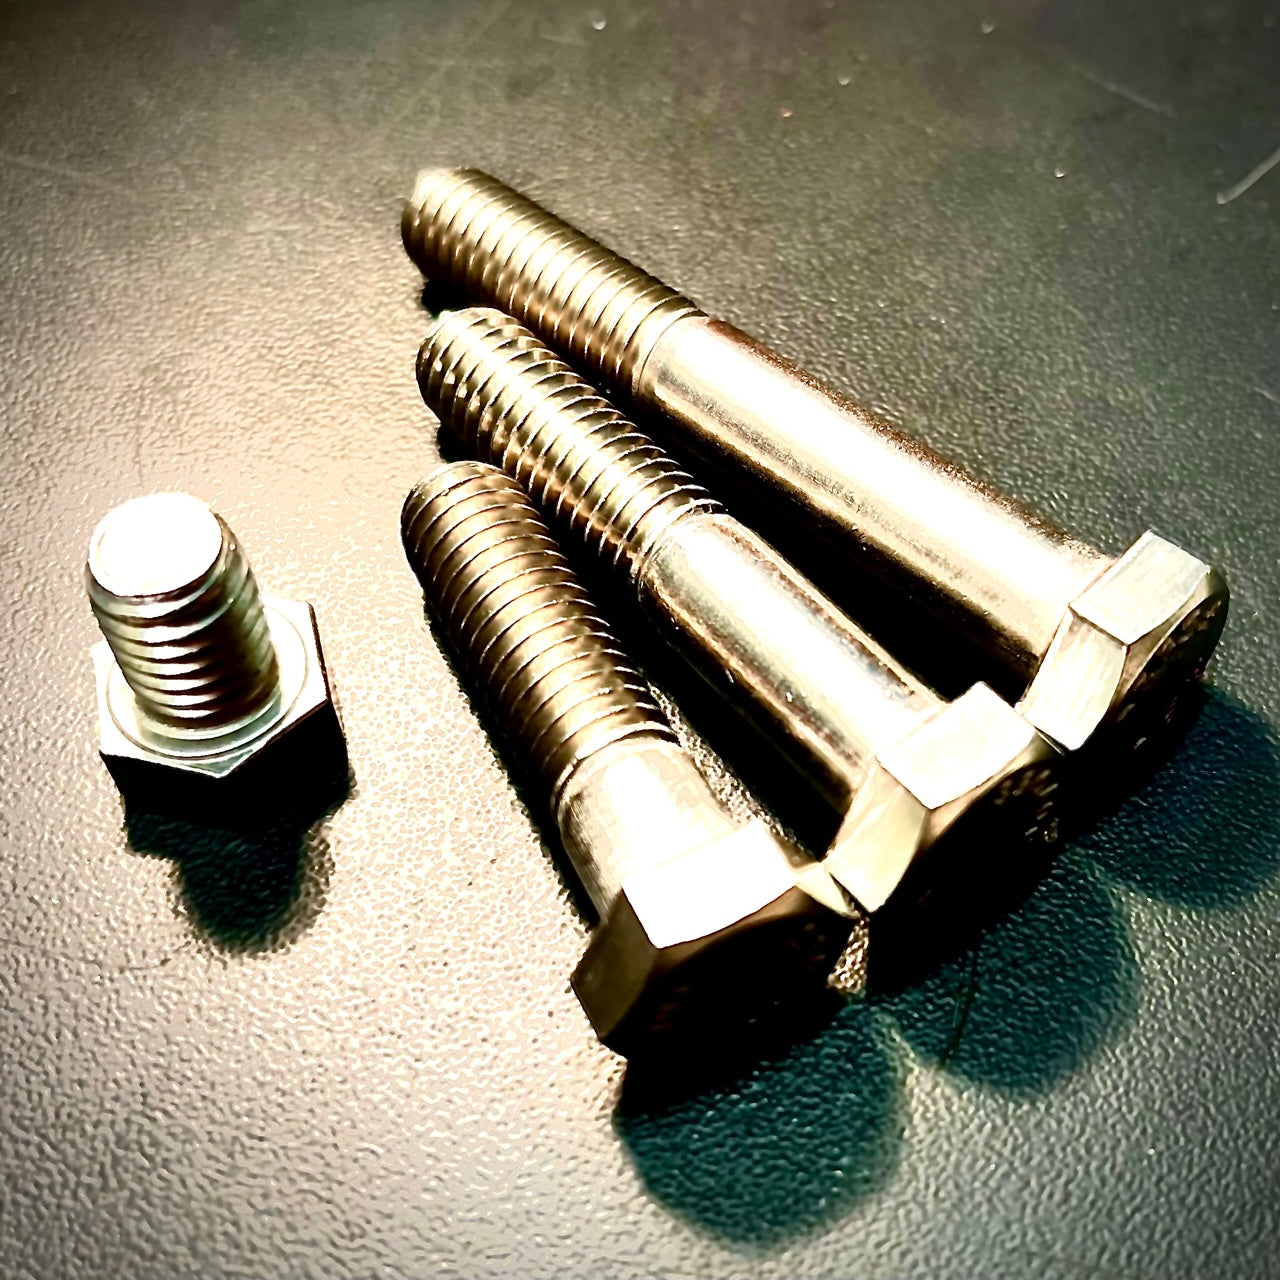 UNC 7/8" Hex Bolt and Set Screws A2 304 Stainless Steel DIN931 - Fixaball Ltd. Fixings and Fasteners UK